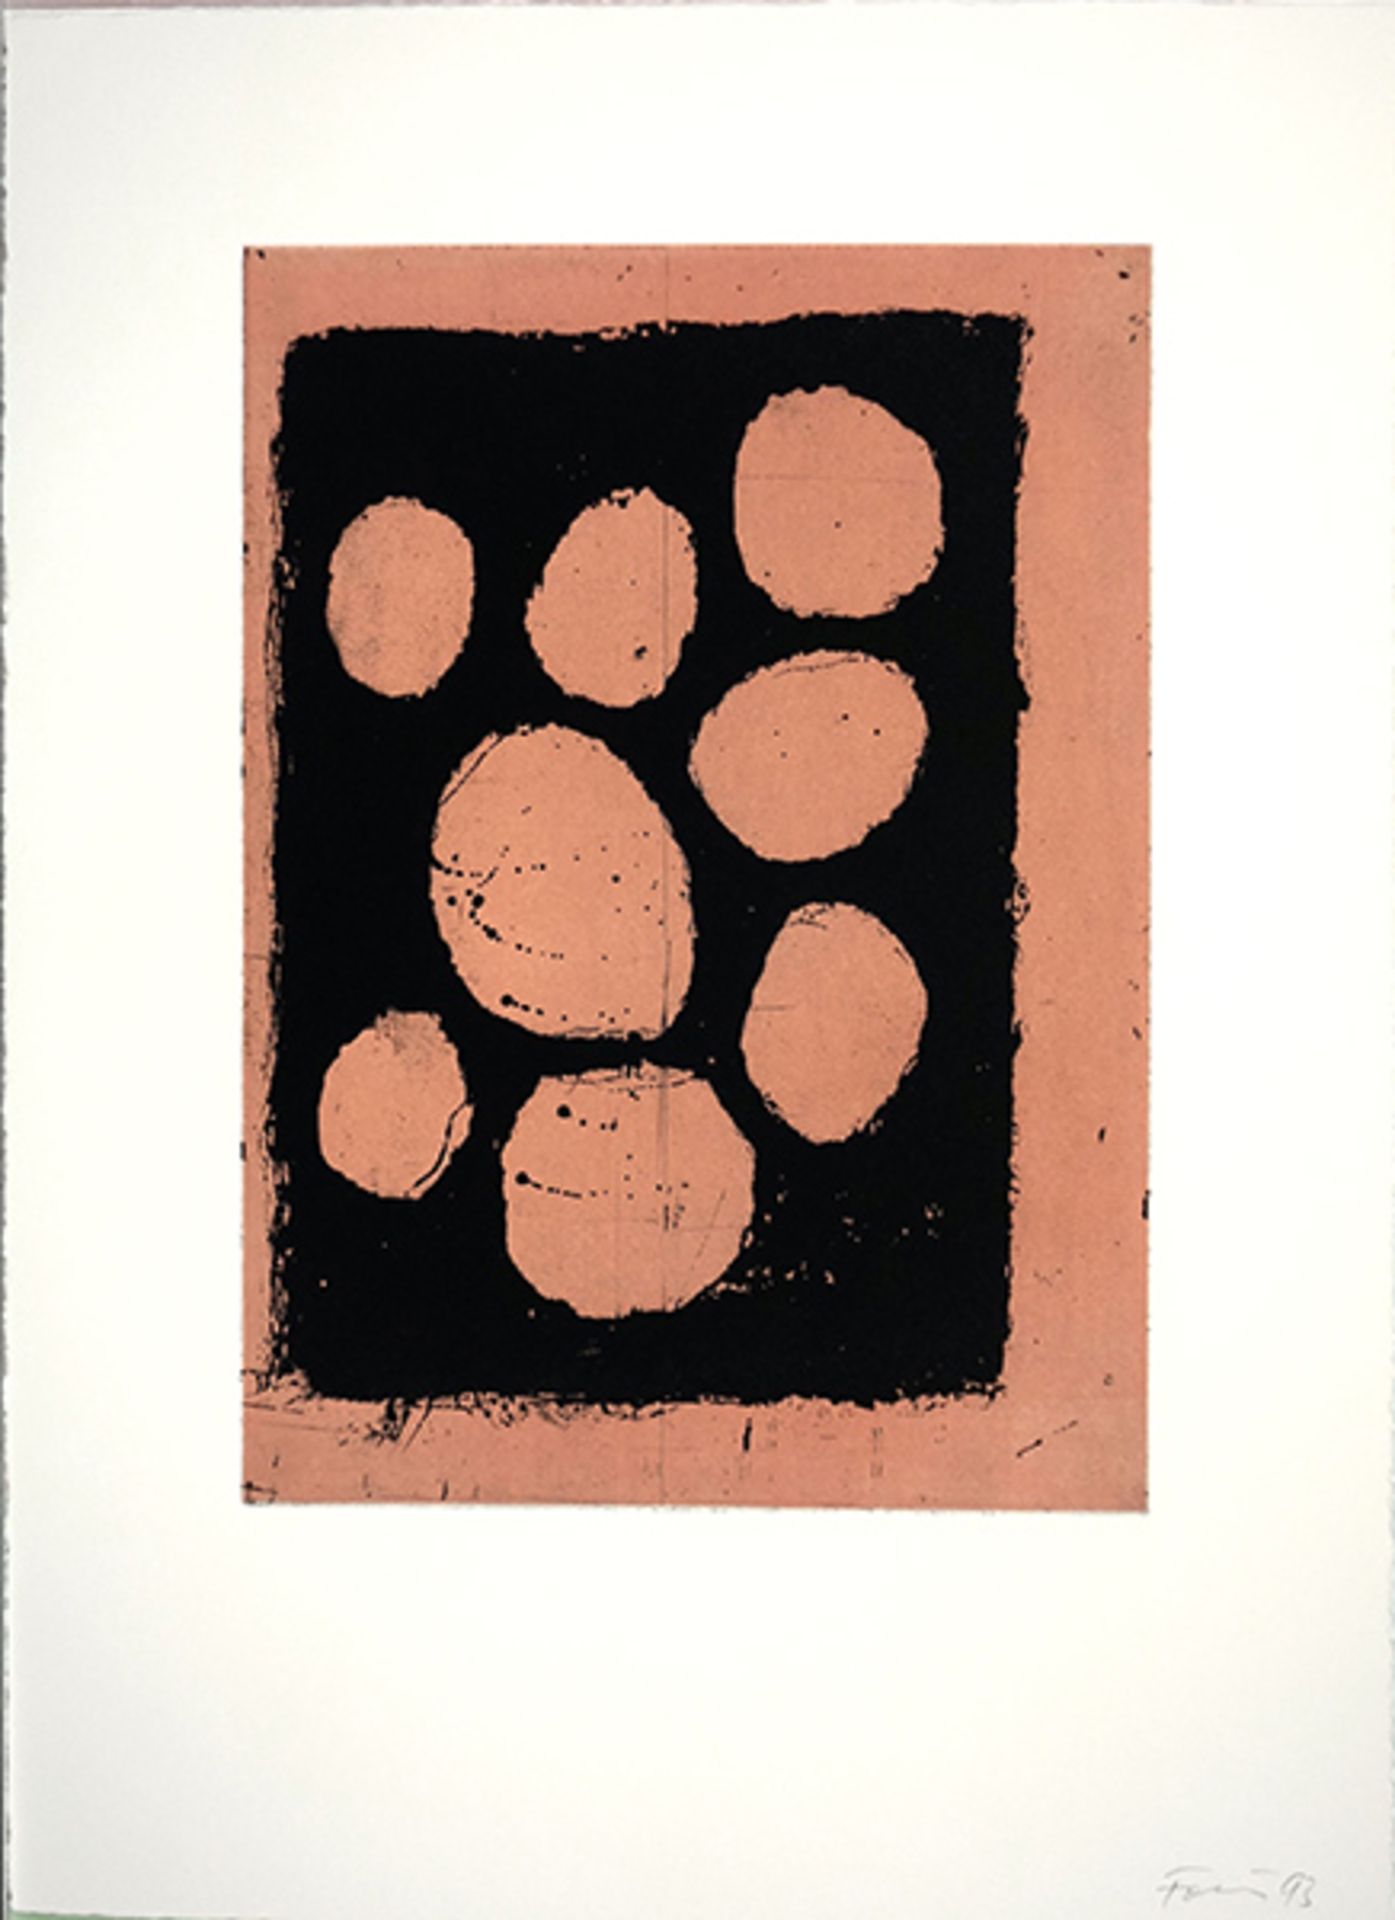 Ohne Titel (1993)Colour etching o paper. Signed and dated. Sheet size: 52,9 x 38,0 cm.